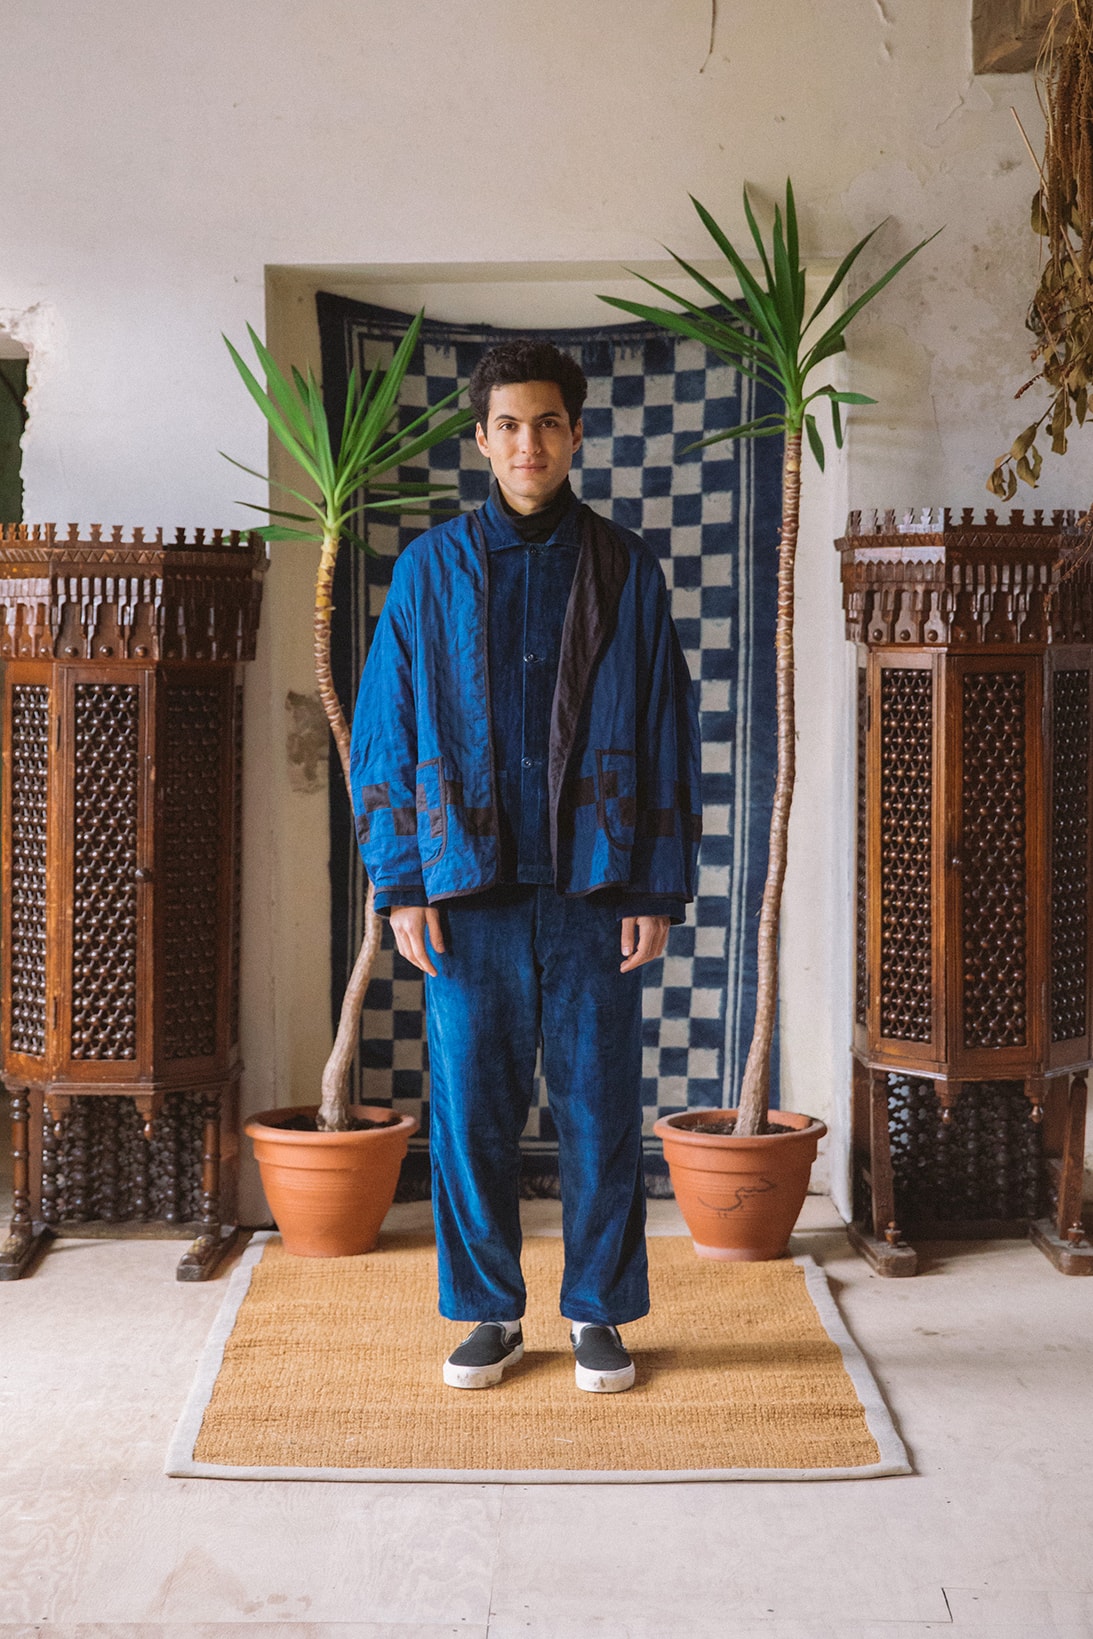 STORY mfg. Fall/Winter 2018 "Is. Lunar" Lookbook Collection Natural Dye Plant Based Fabric